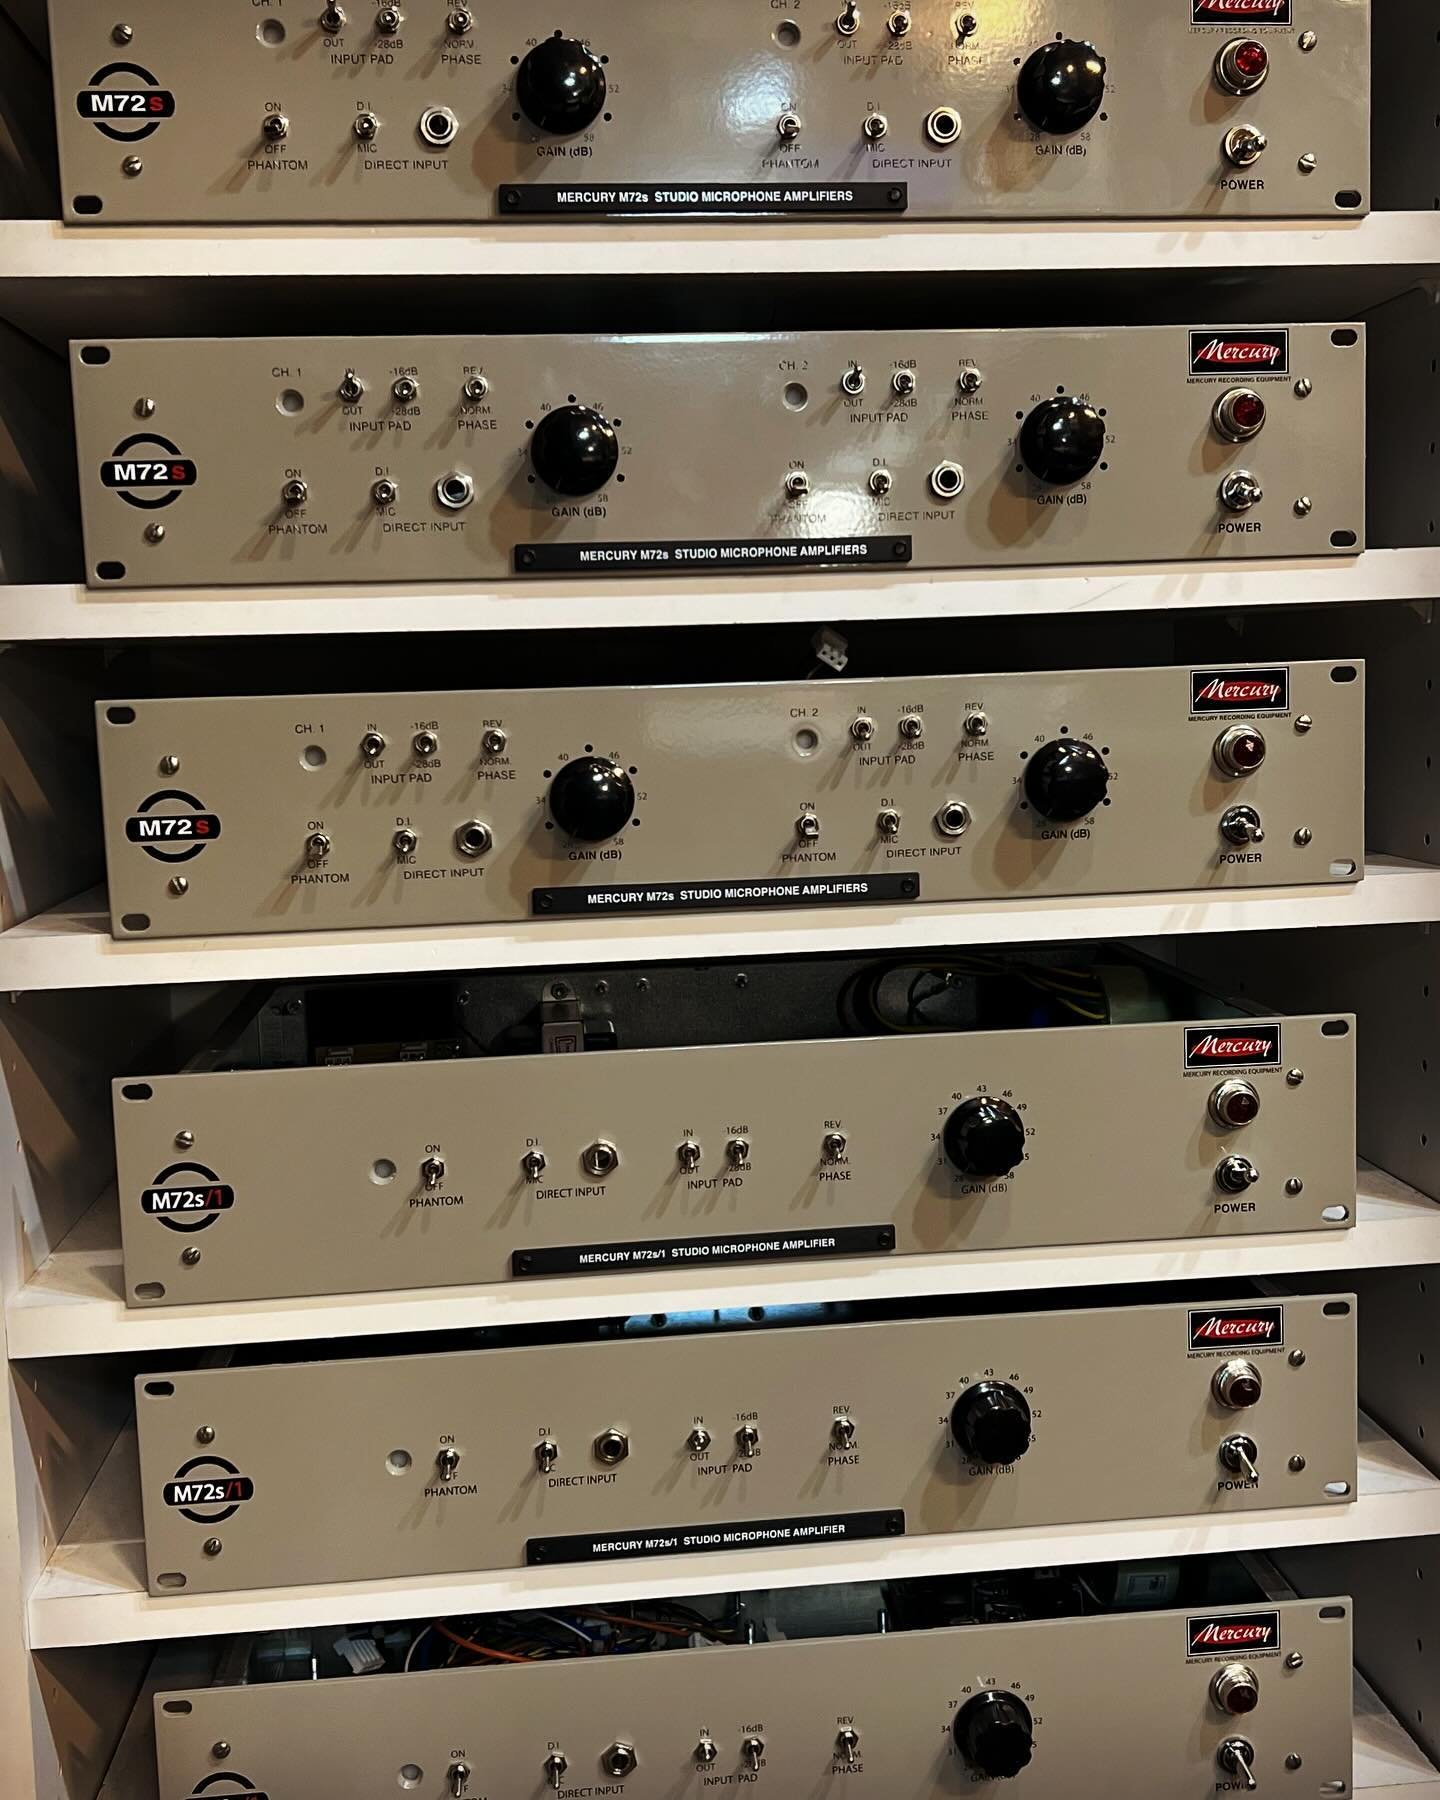 We are celebrating 25 years at Mercury Recording Equipment and 30 years at Marquette Audio Labs&hellip; still doing what we do and loving it! Need High Quality, American-Made, Pro Audio Tools? We got you covered&hellip; check out our website www.merc